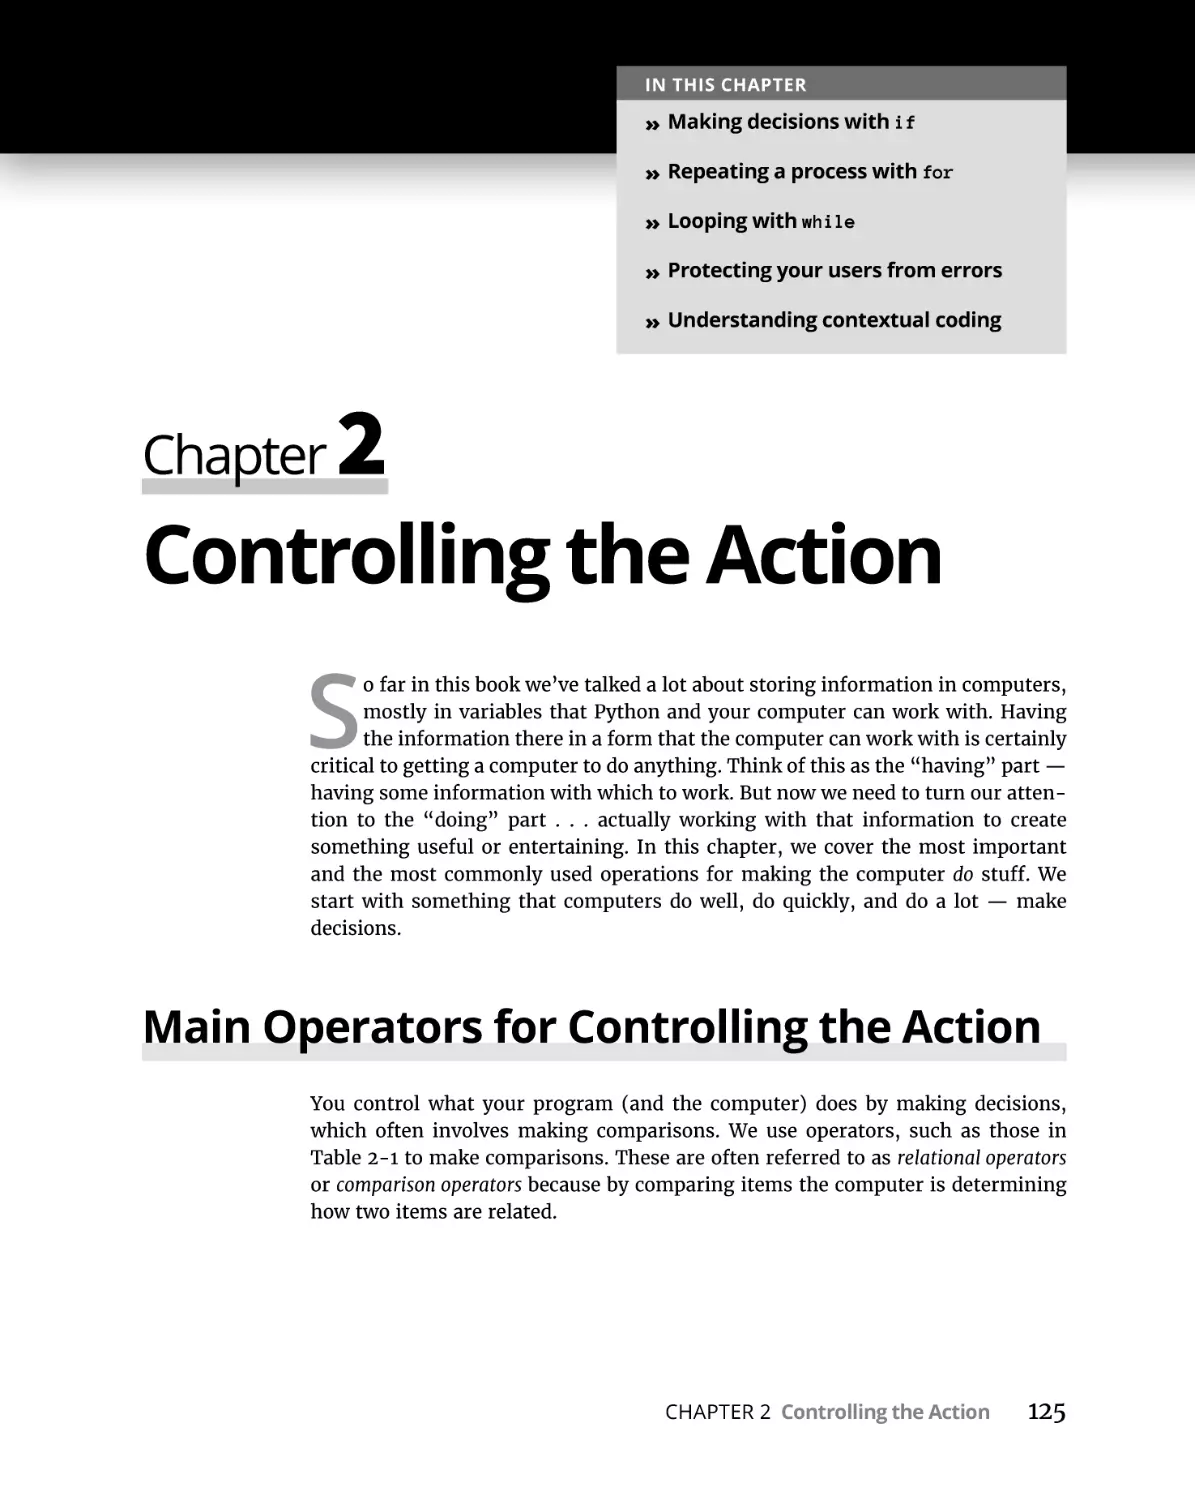 Chapter 2 Controlling the Action
Main Operators for Controlling the Action